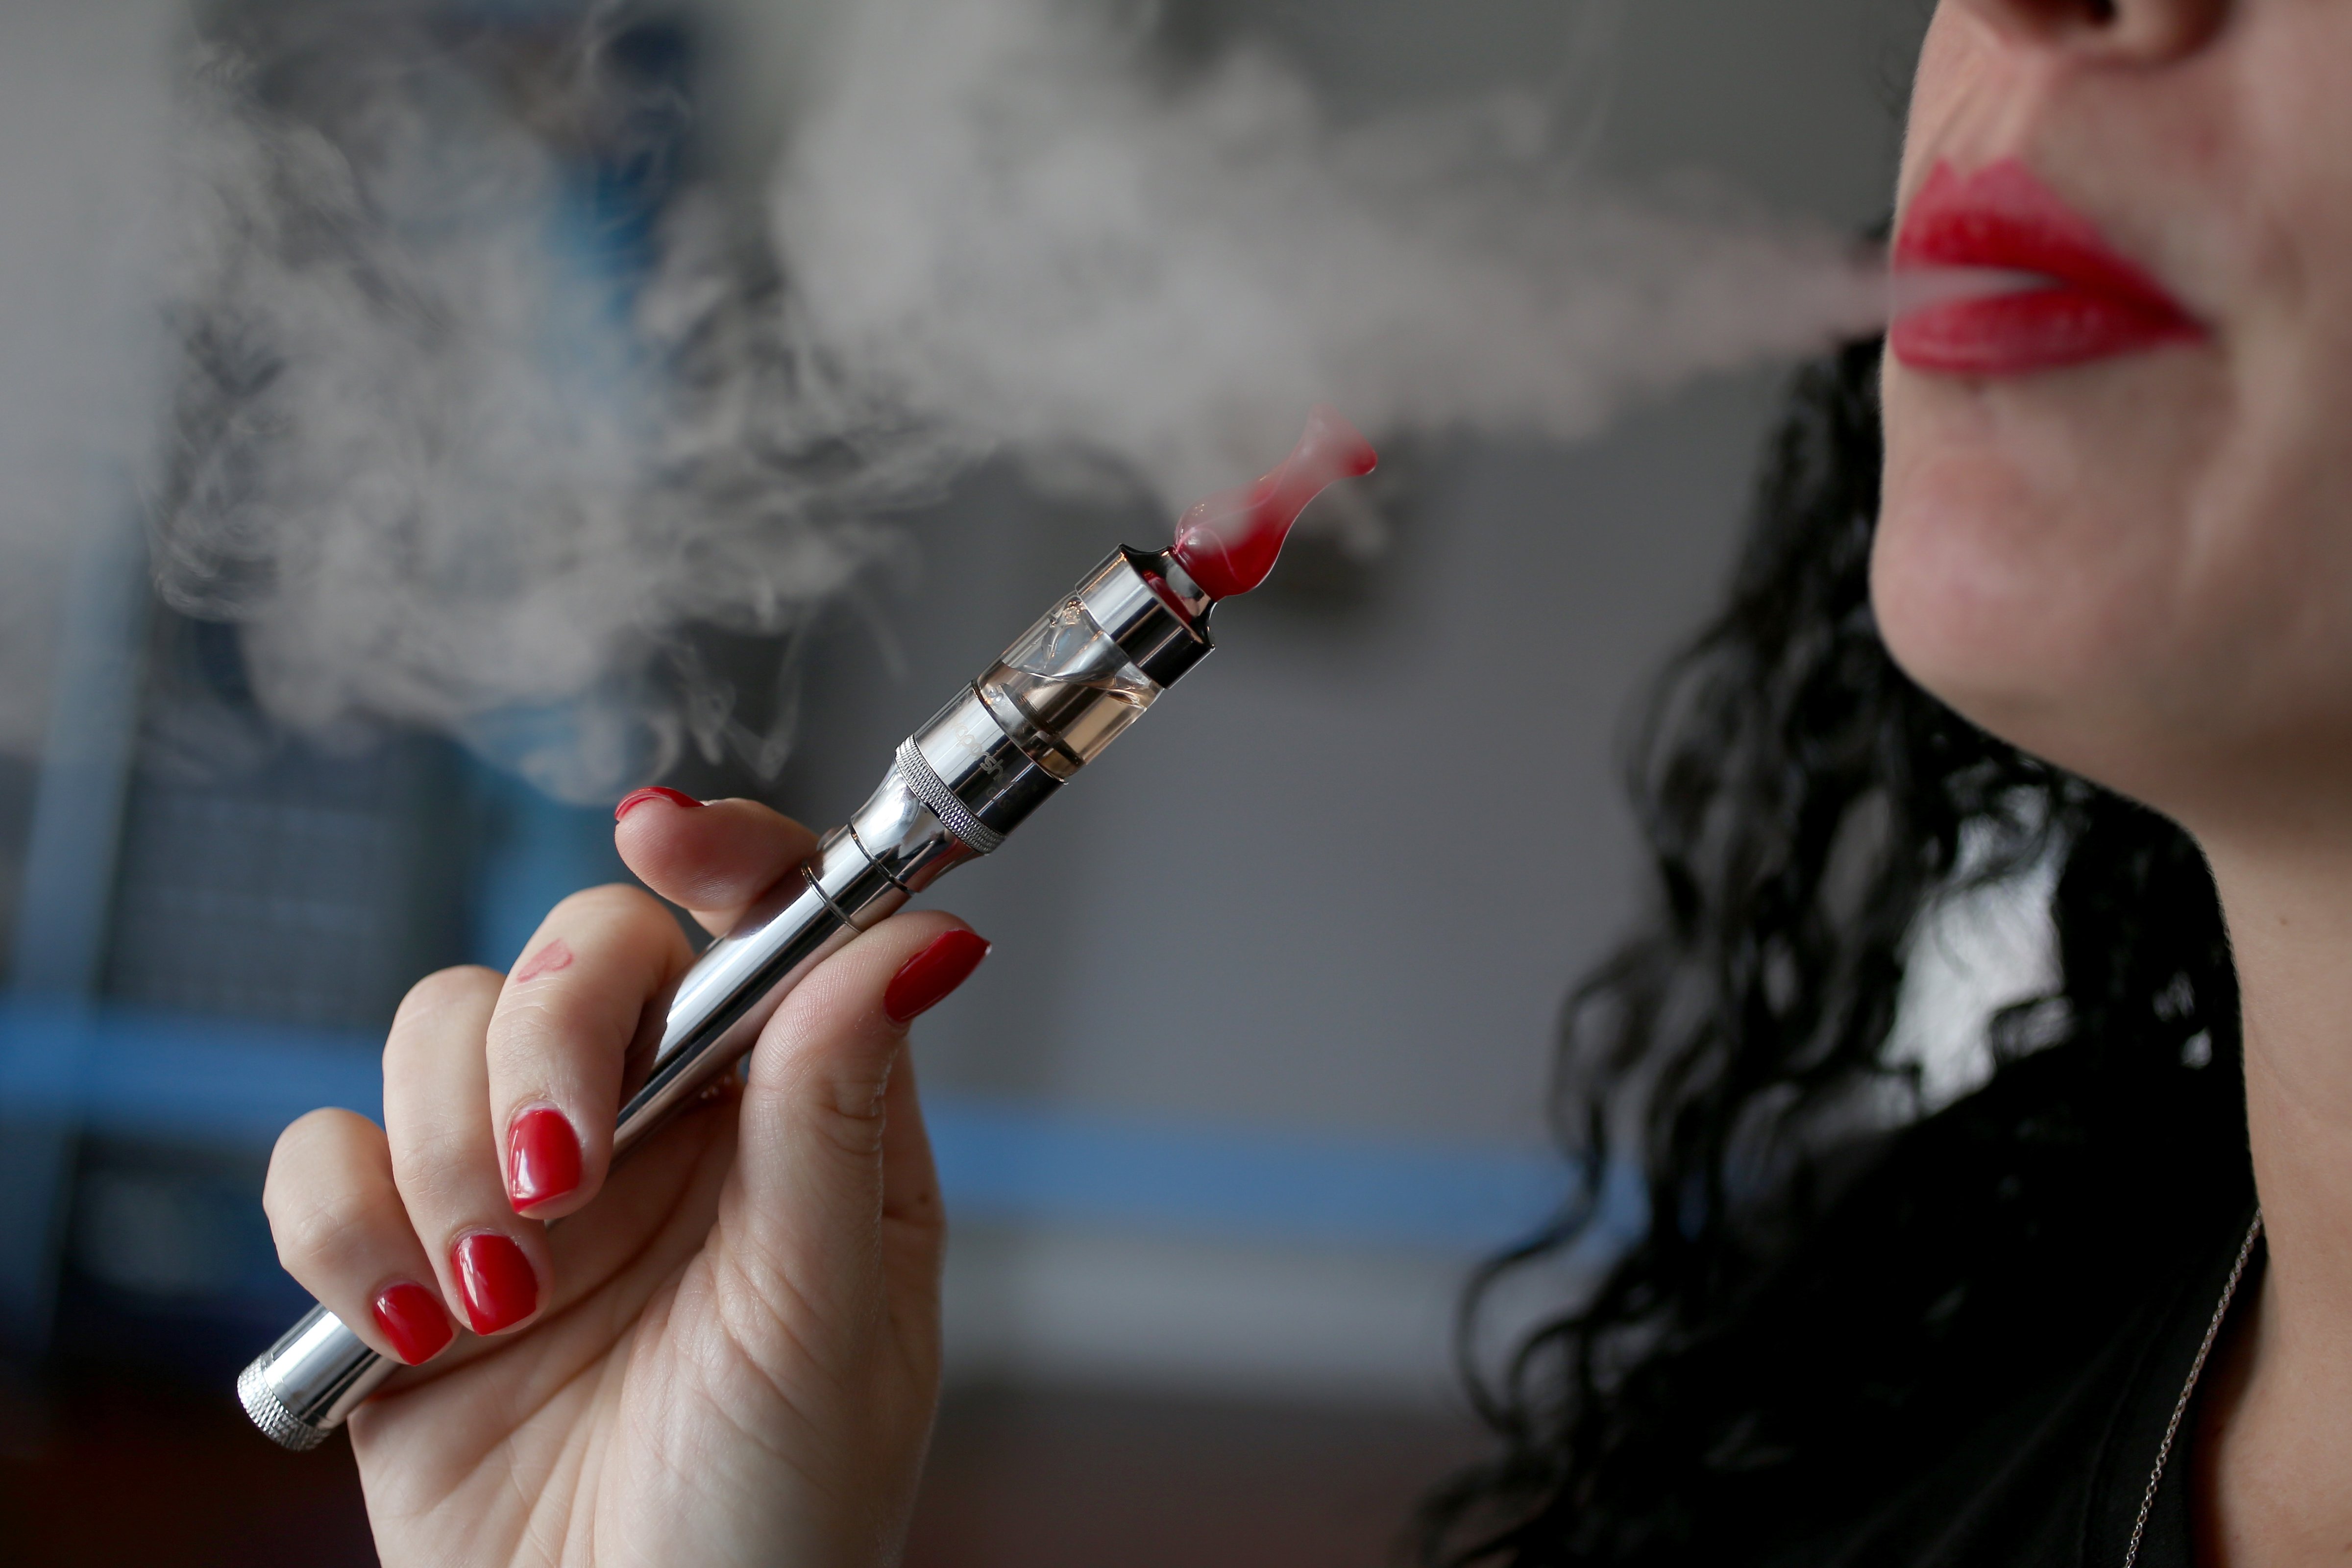 A patron enjoys an electronic cigarette at the Vapor Shark store in Miami on Feb. 20, 2014 (Joe Raedle—Getty Images)